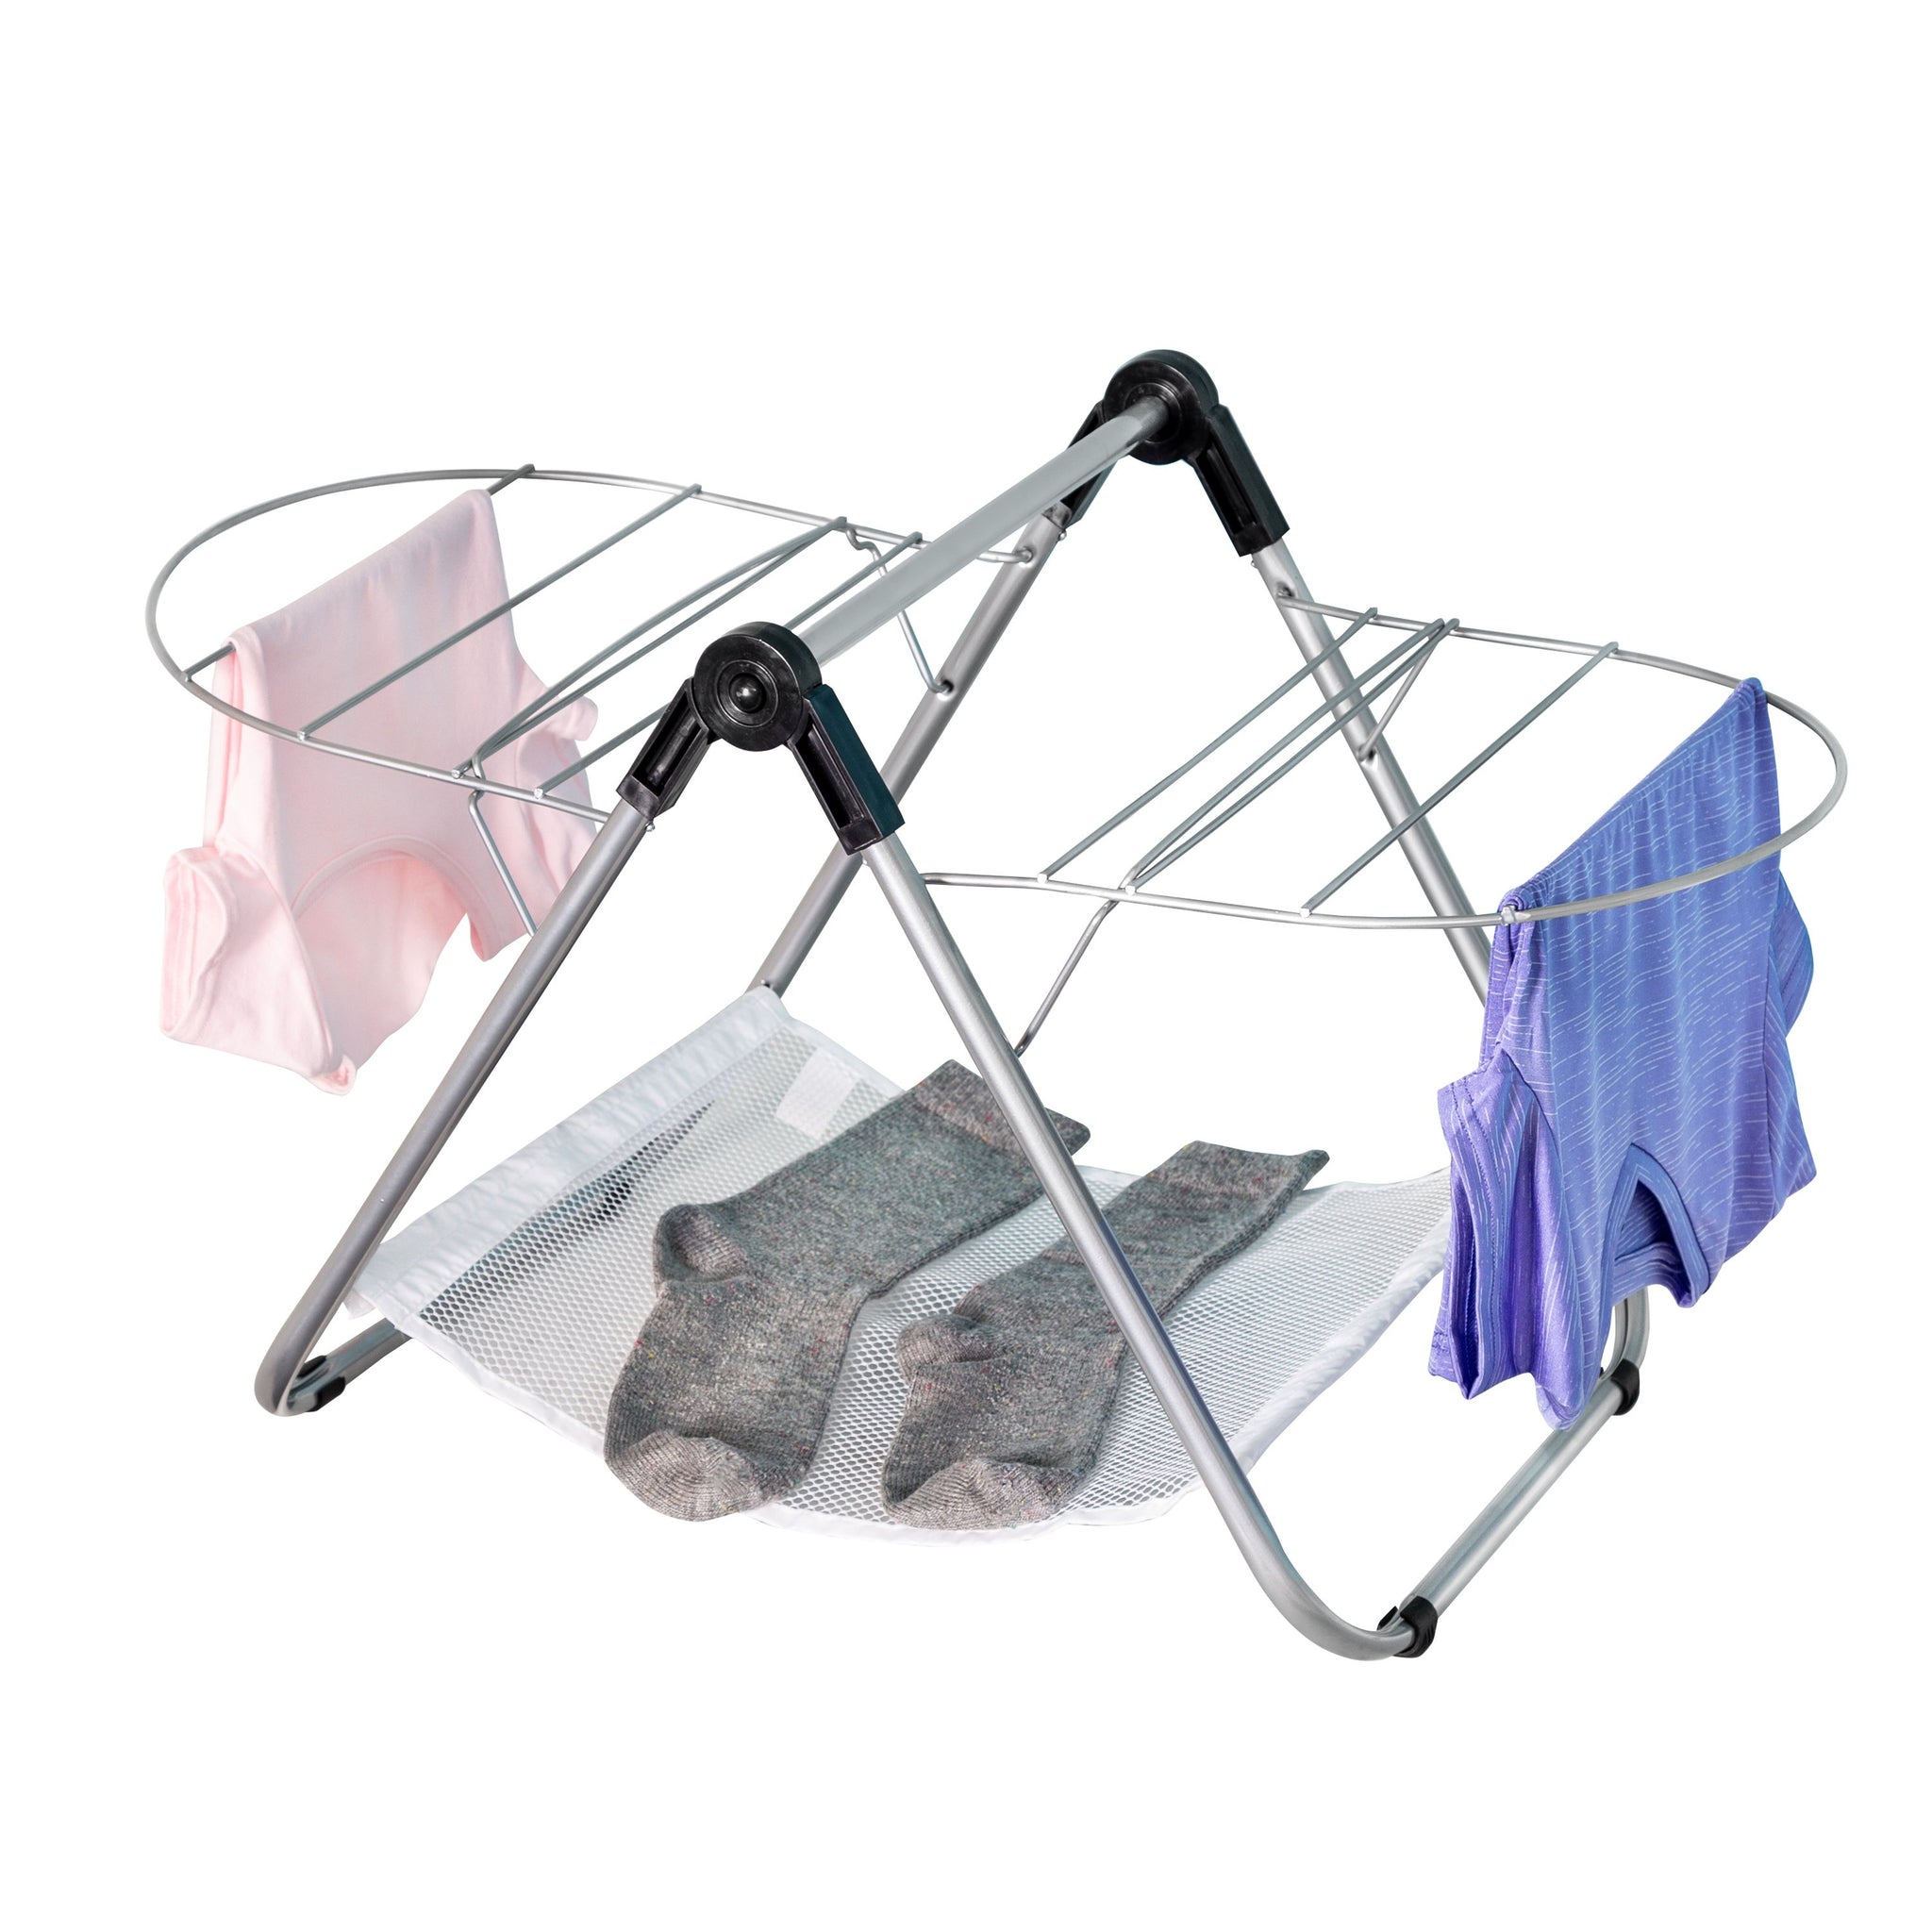 Collapsible Tabletop Clothes Drying Rack, Silver